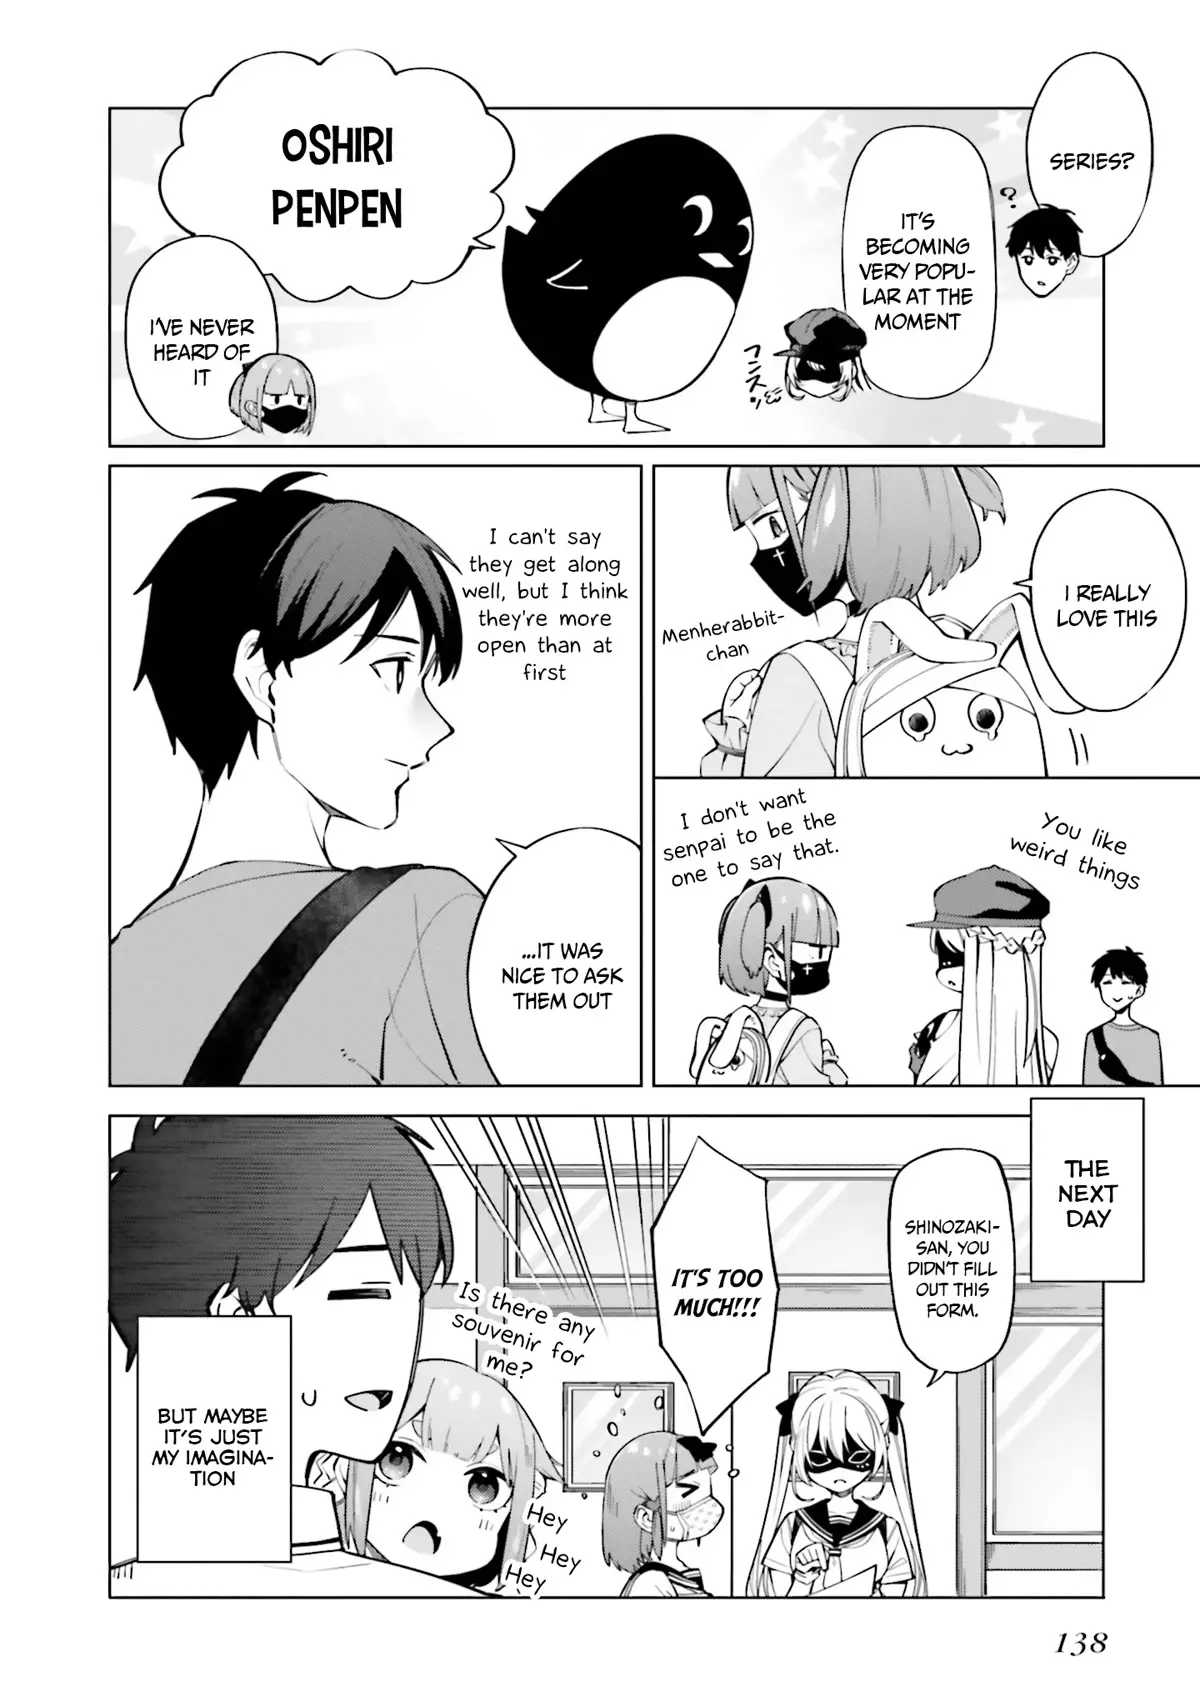 I Don't Understand Shirogane-San's Facial Expression At All - 11 page 27-e0d8ee9f